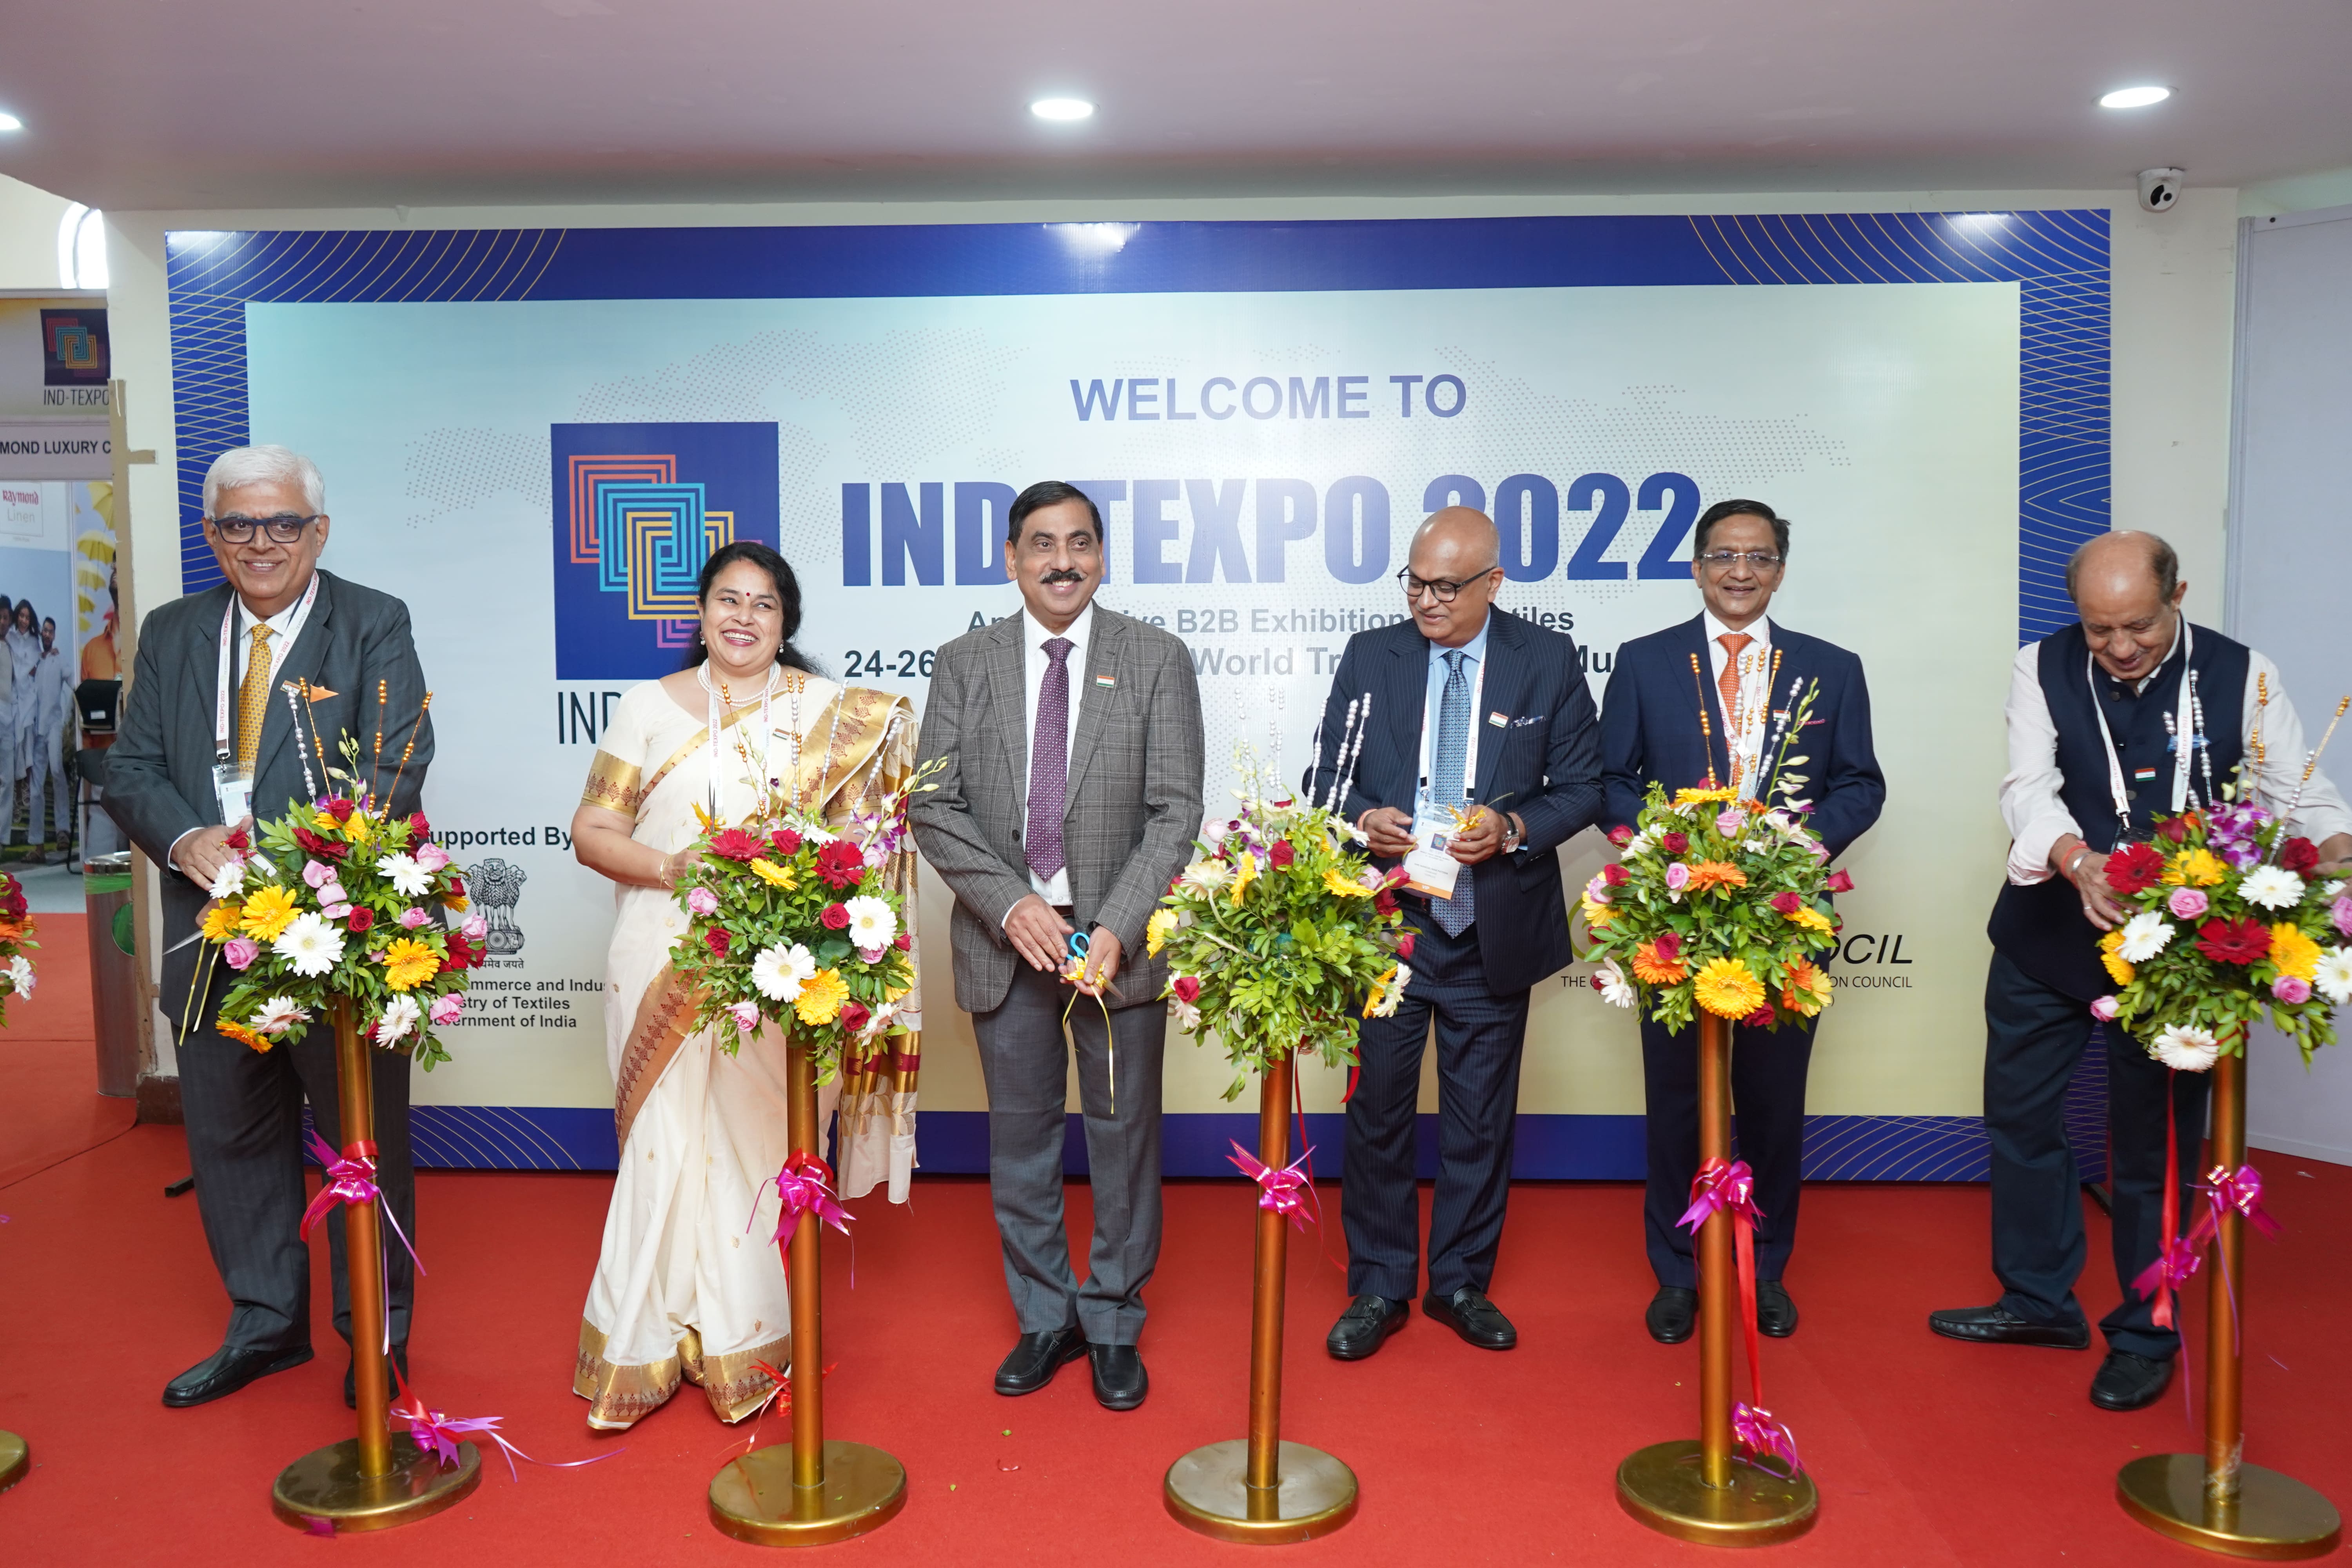 Shri U P Singh, Secretary Textiles, Smt. Roop Rashi, Textile Commissioner along with Shri Manoj Patodia, Chairman TEXPROCIL inaugurating the “Ind-Texpo” Show organised by TEXPROCIL at World Trade Centre, Mumbai on 24th August 2022